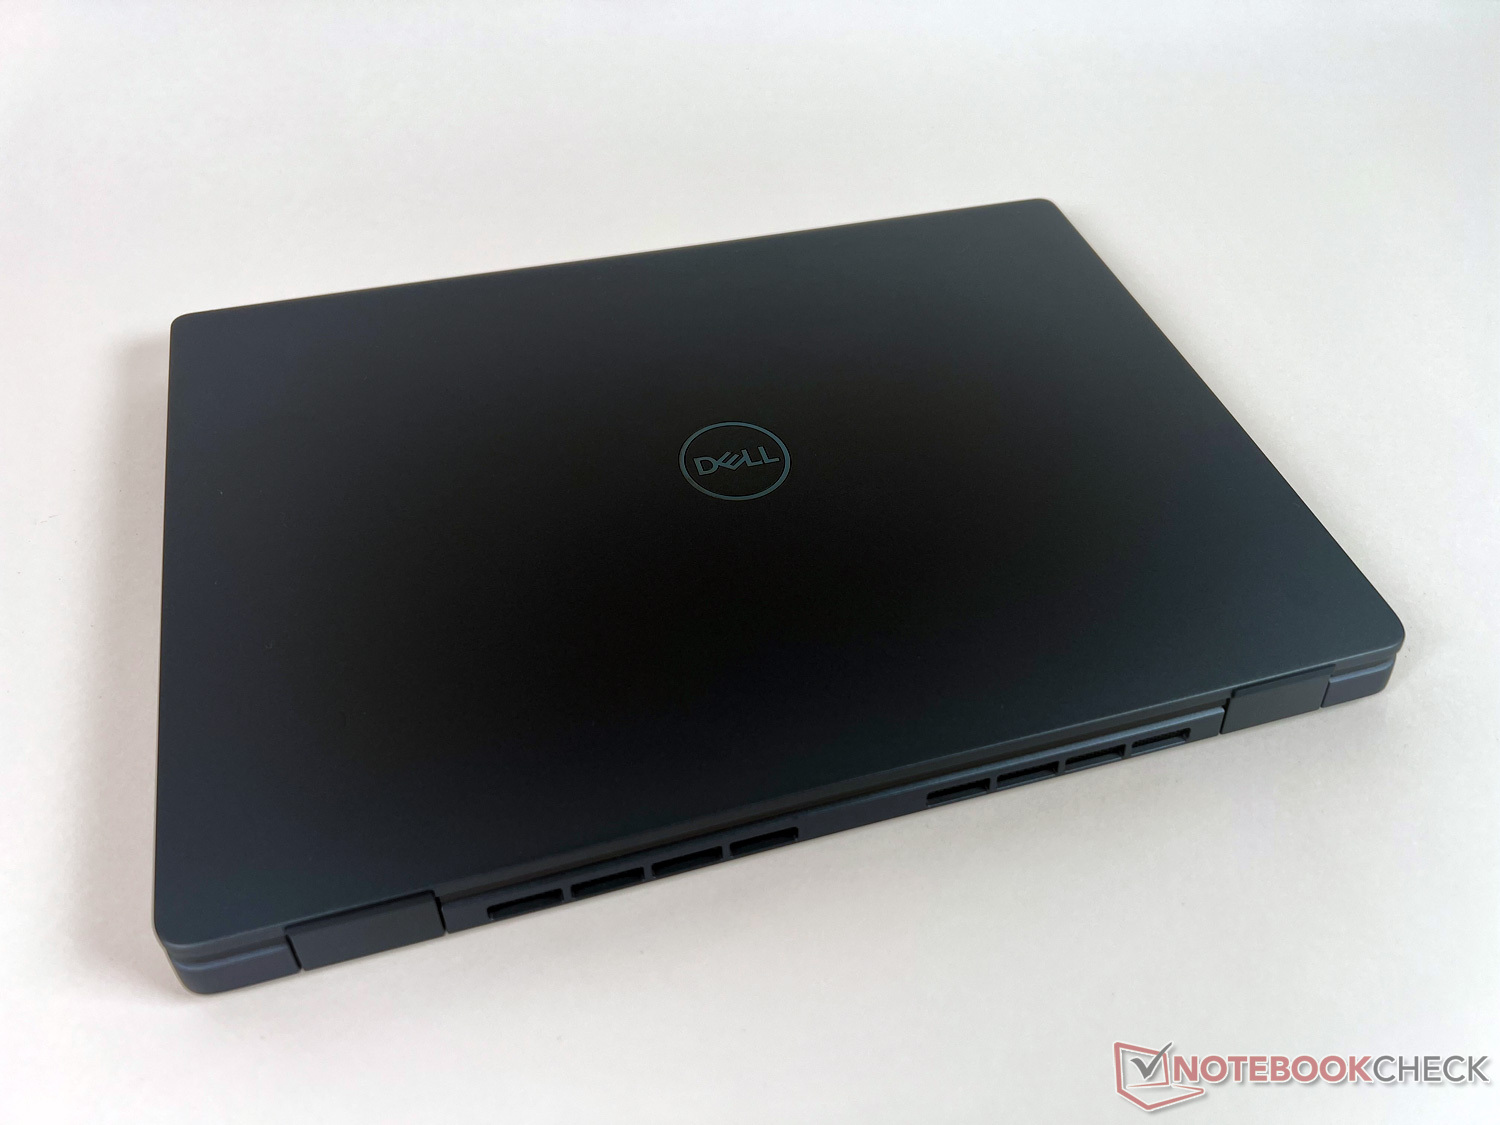 Dell Latitude 7340 laptop review: 0.22 lb less with negligible impact ...